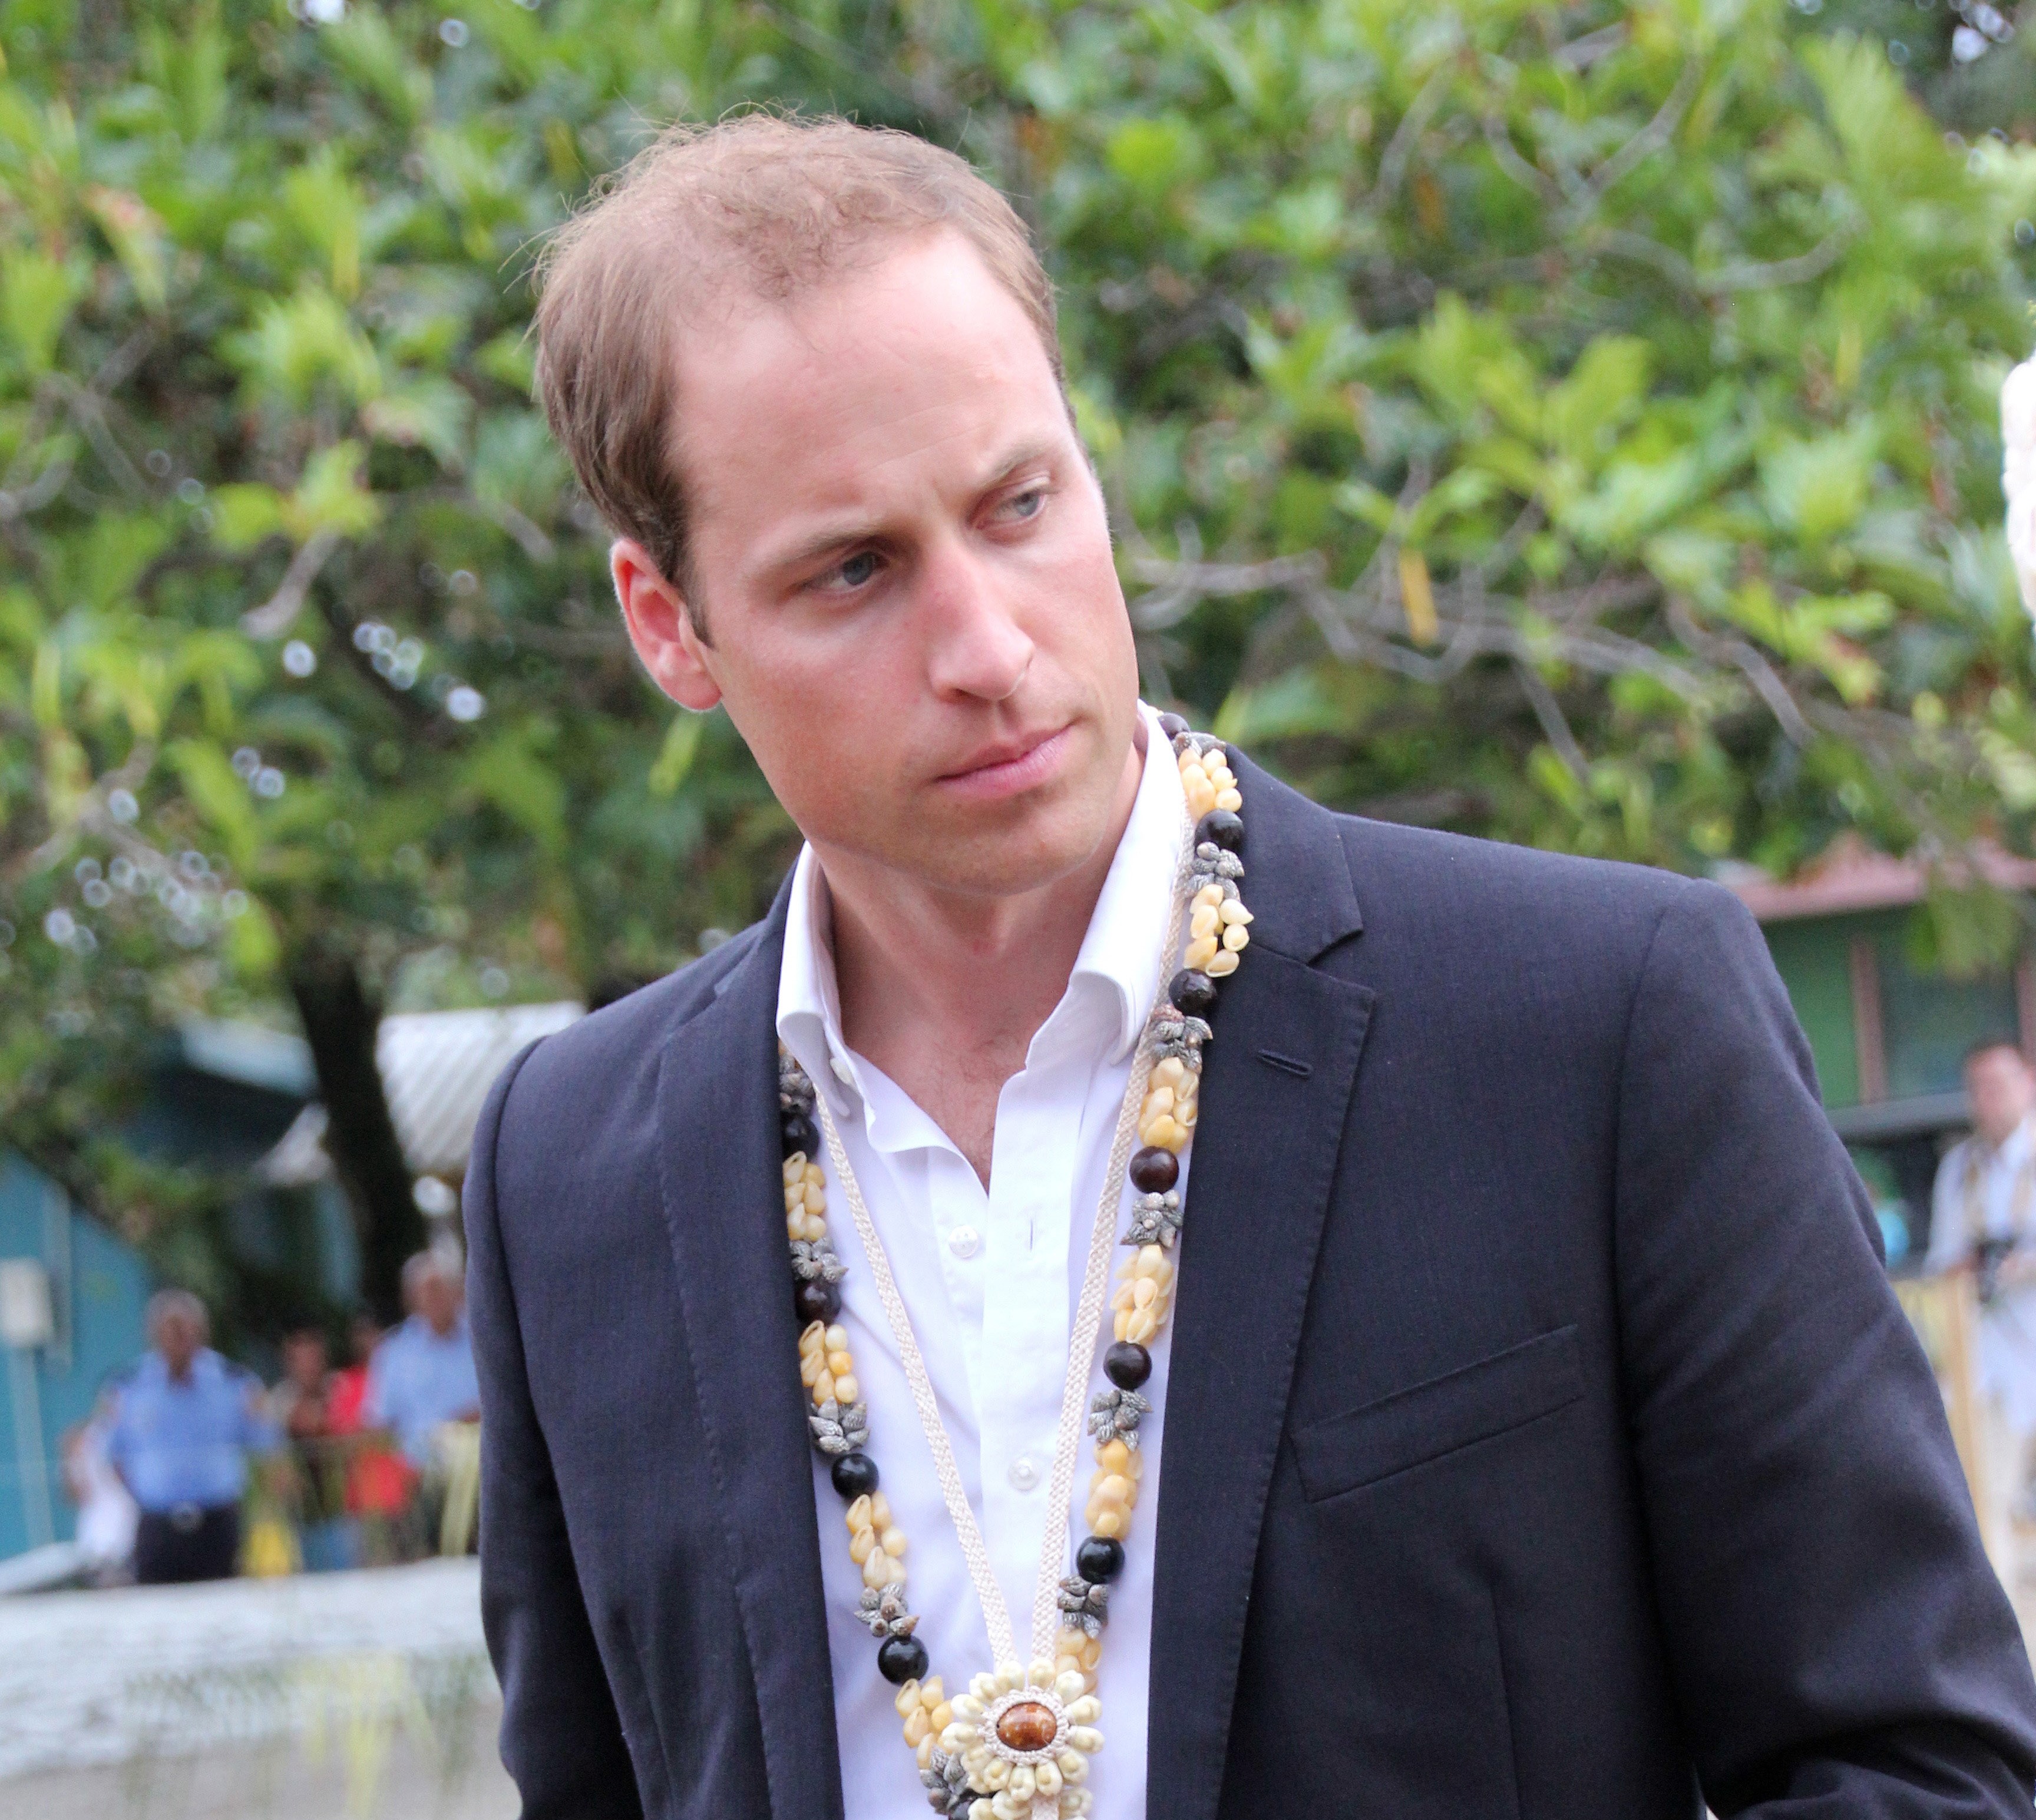 Prince William during his visit to Funafuti a day after his lawyers lodged a criminal complaint against a French tabloid for publishing pictures of Kate Middleton sunbathing topless